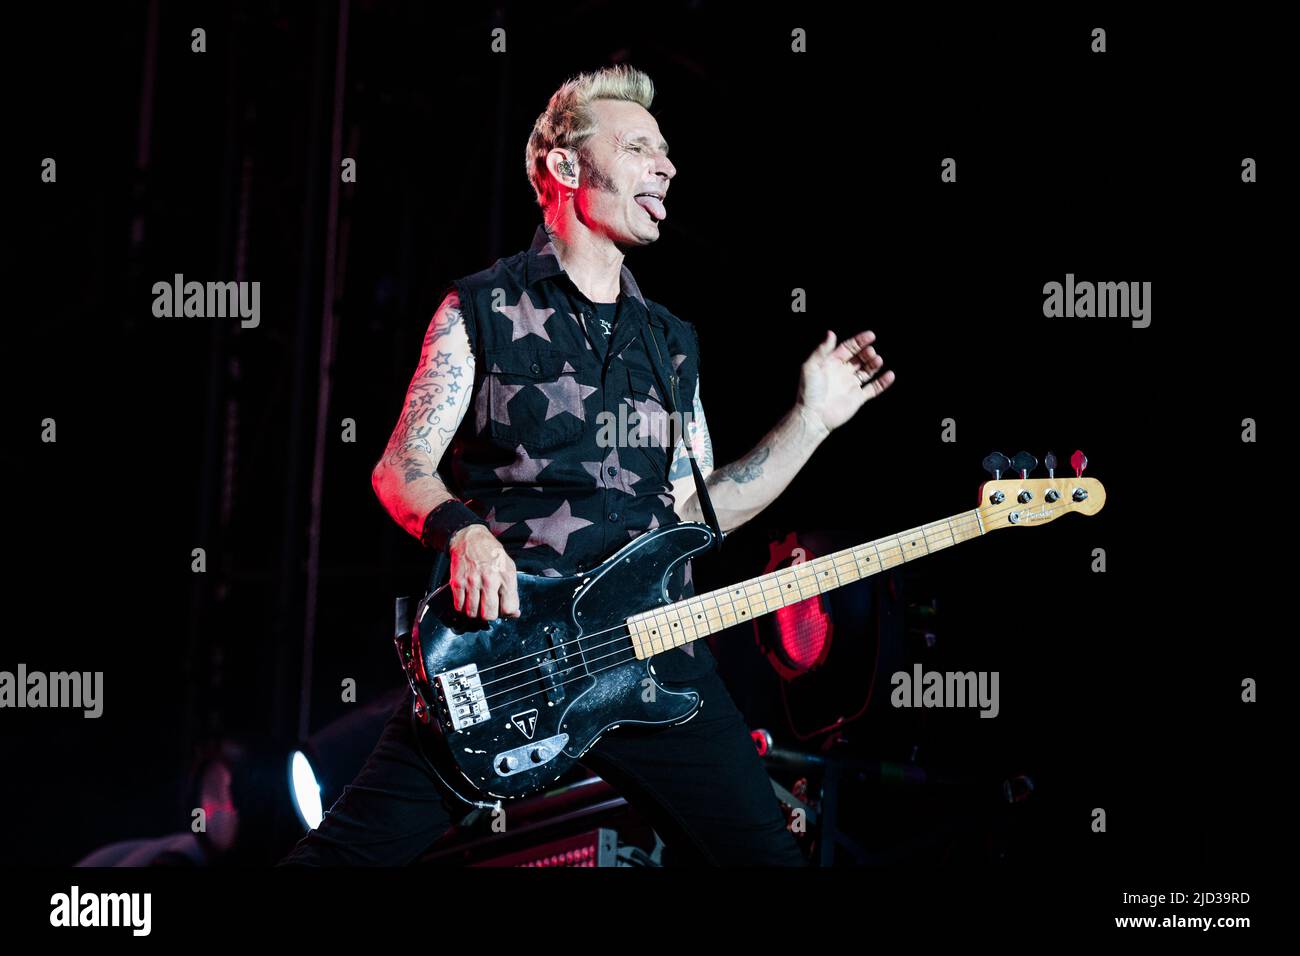 ITALY, MILAN, JUNE 15TH 2022: Mike Dirnt, bassist of the American punk rock band GREEN DAY preforms live on stage at Ippodromo SNAI La Maura during the 'I-Days Festival 2022' Stock Photo